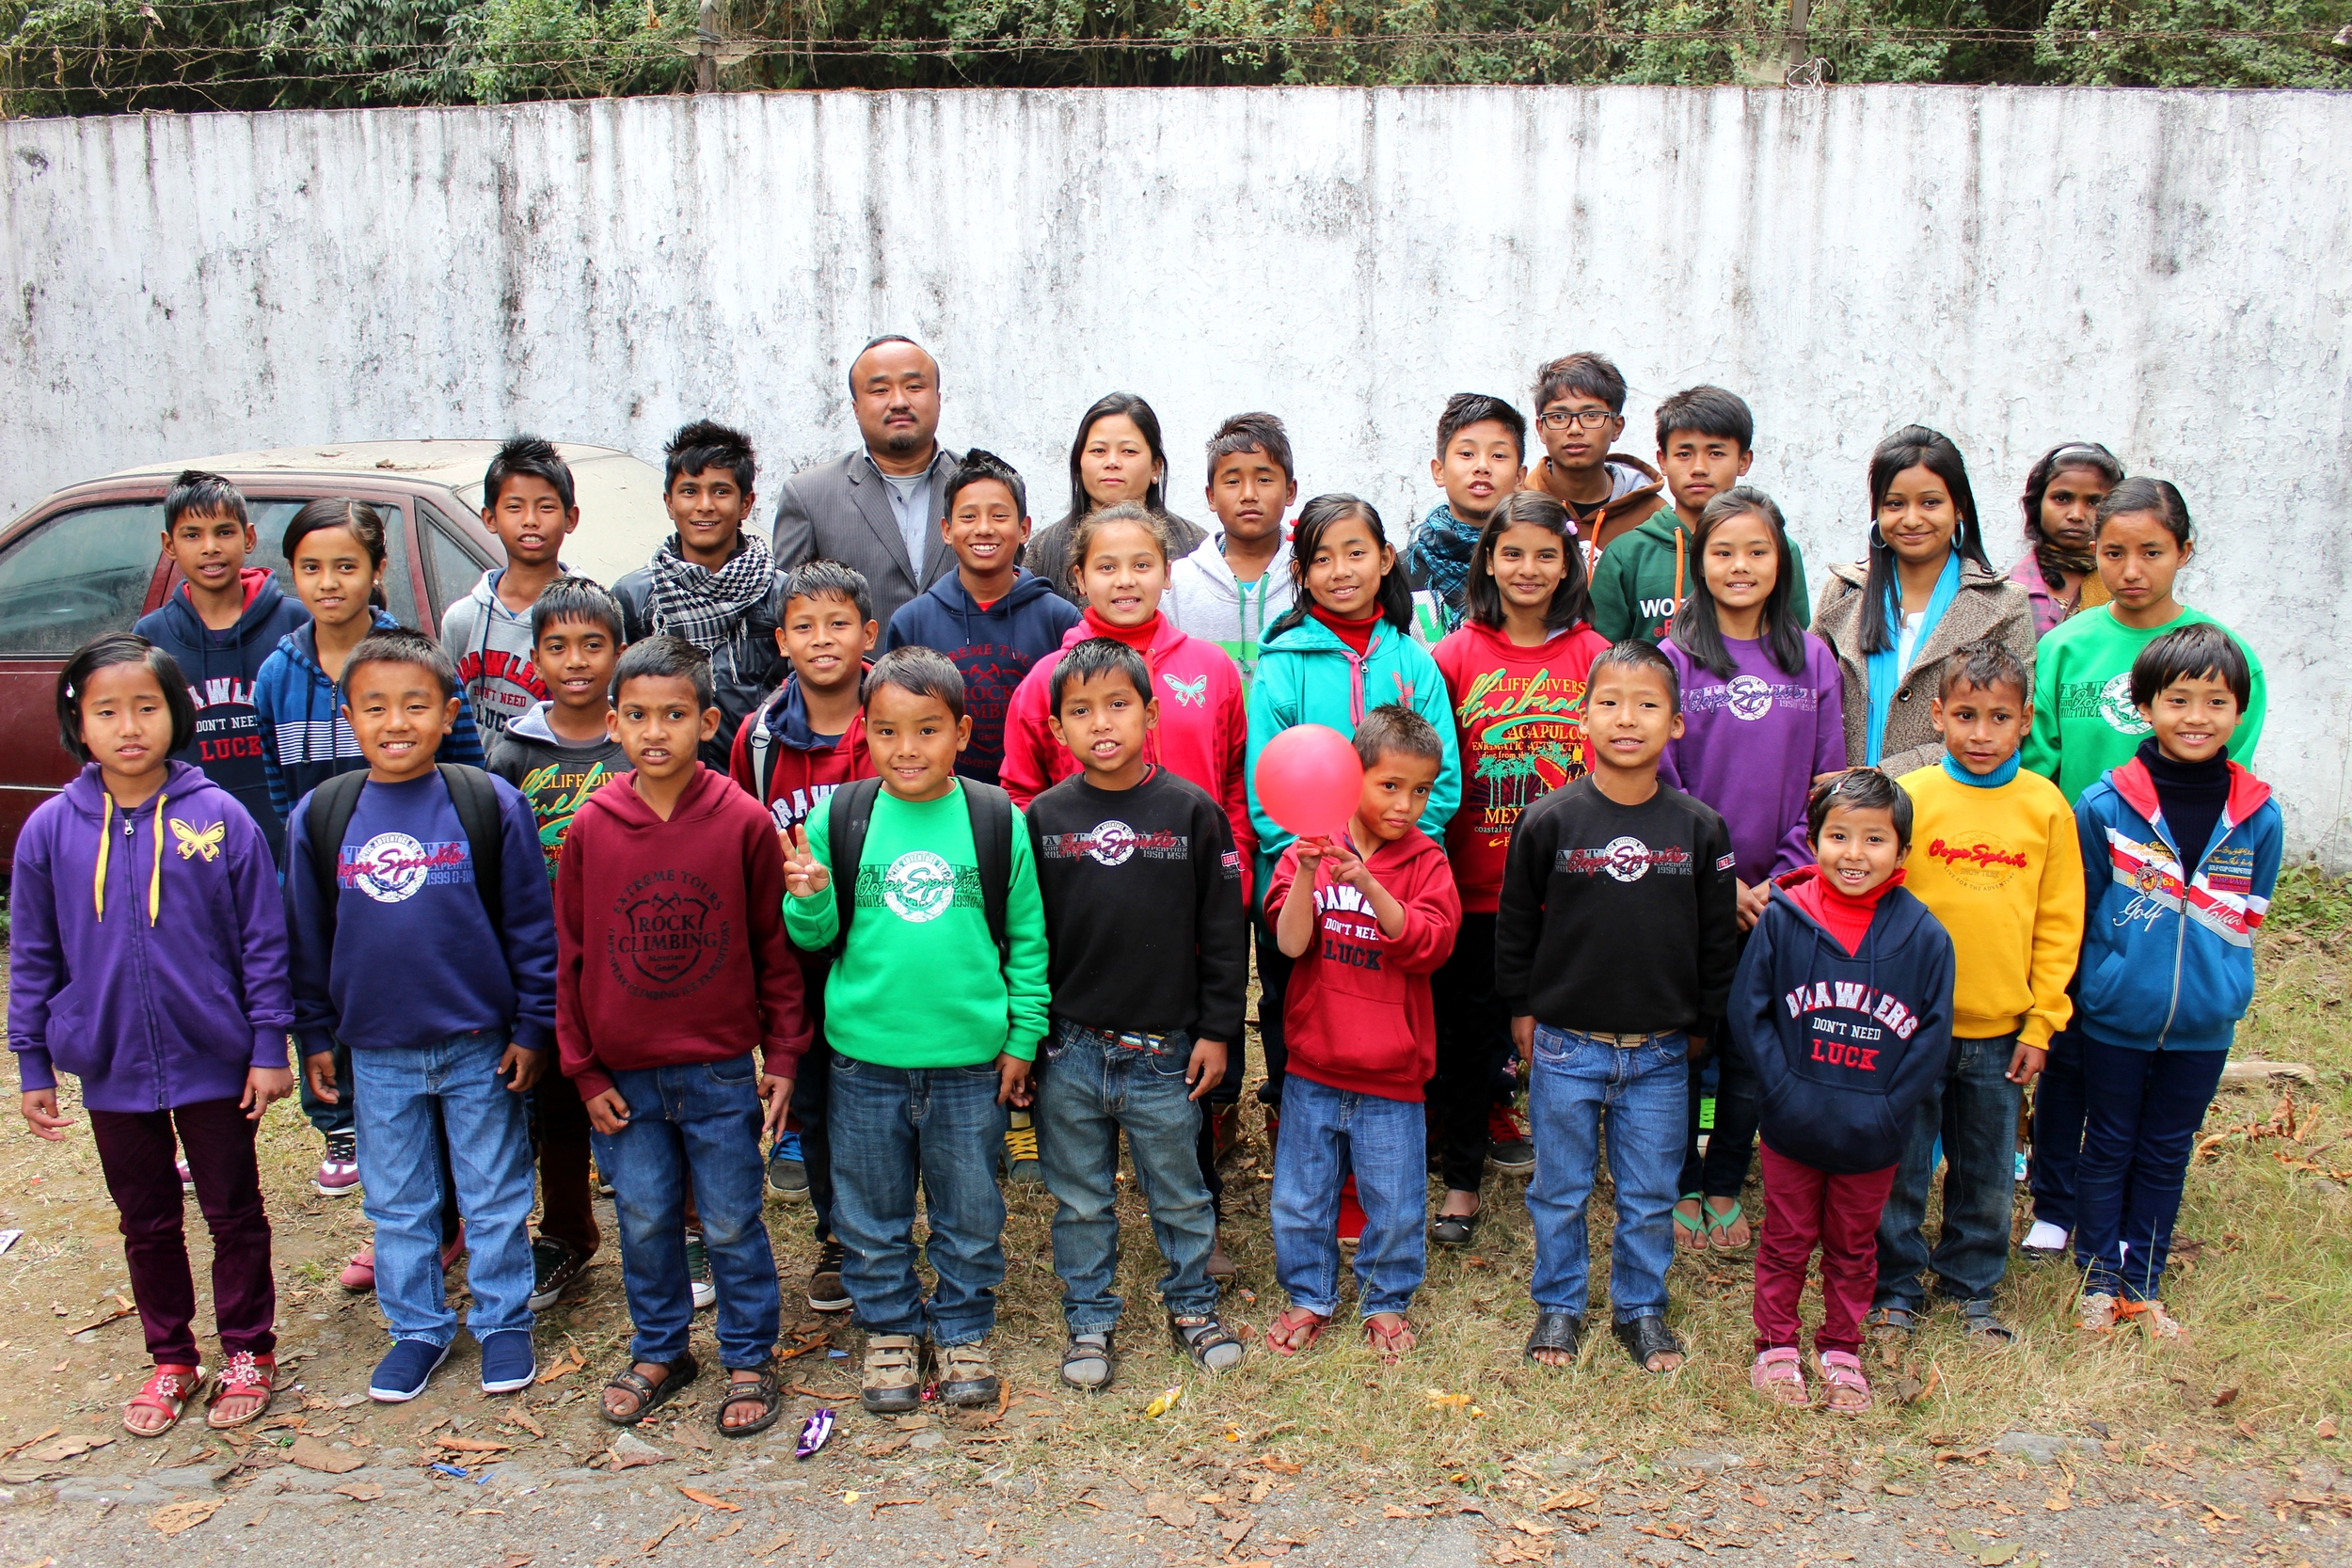  The Children and staff of the Kalimpong 1 children's home. 